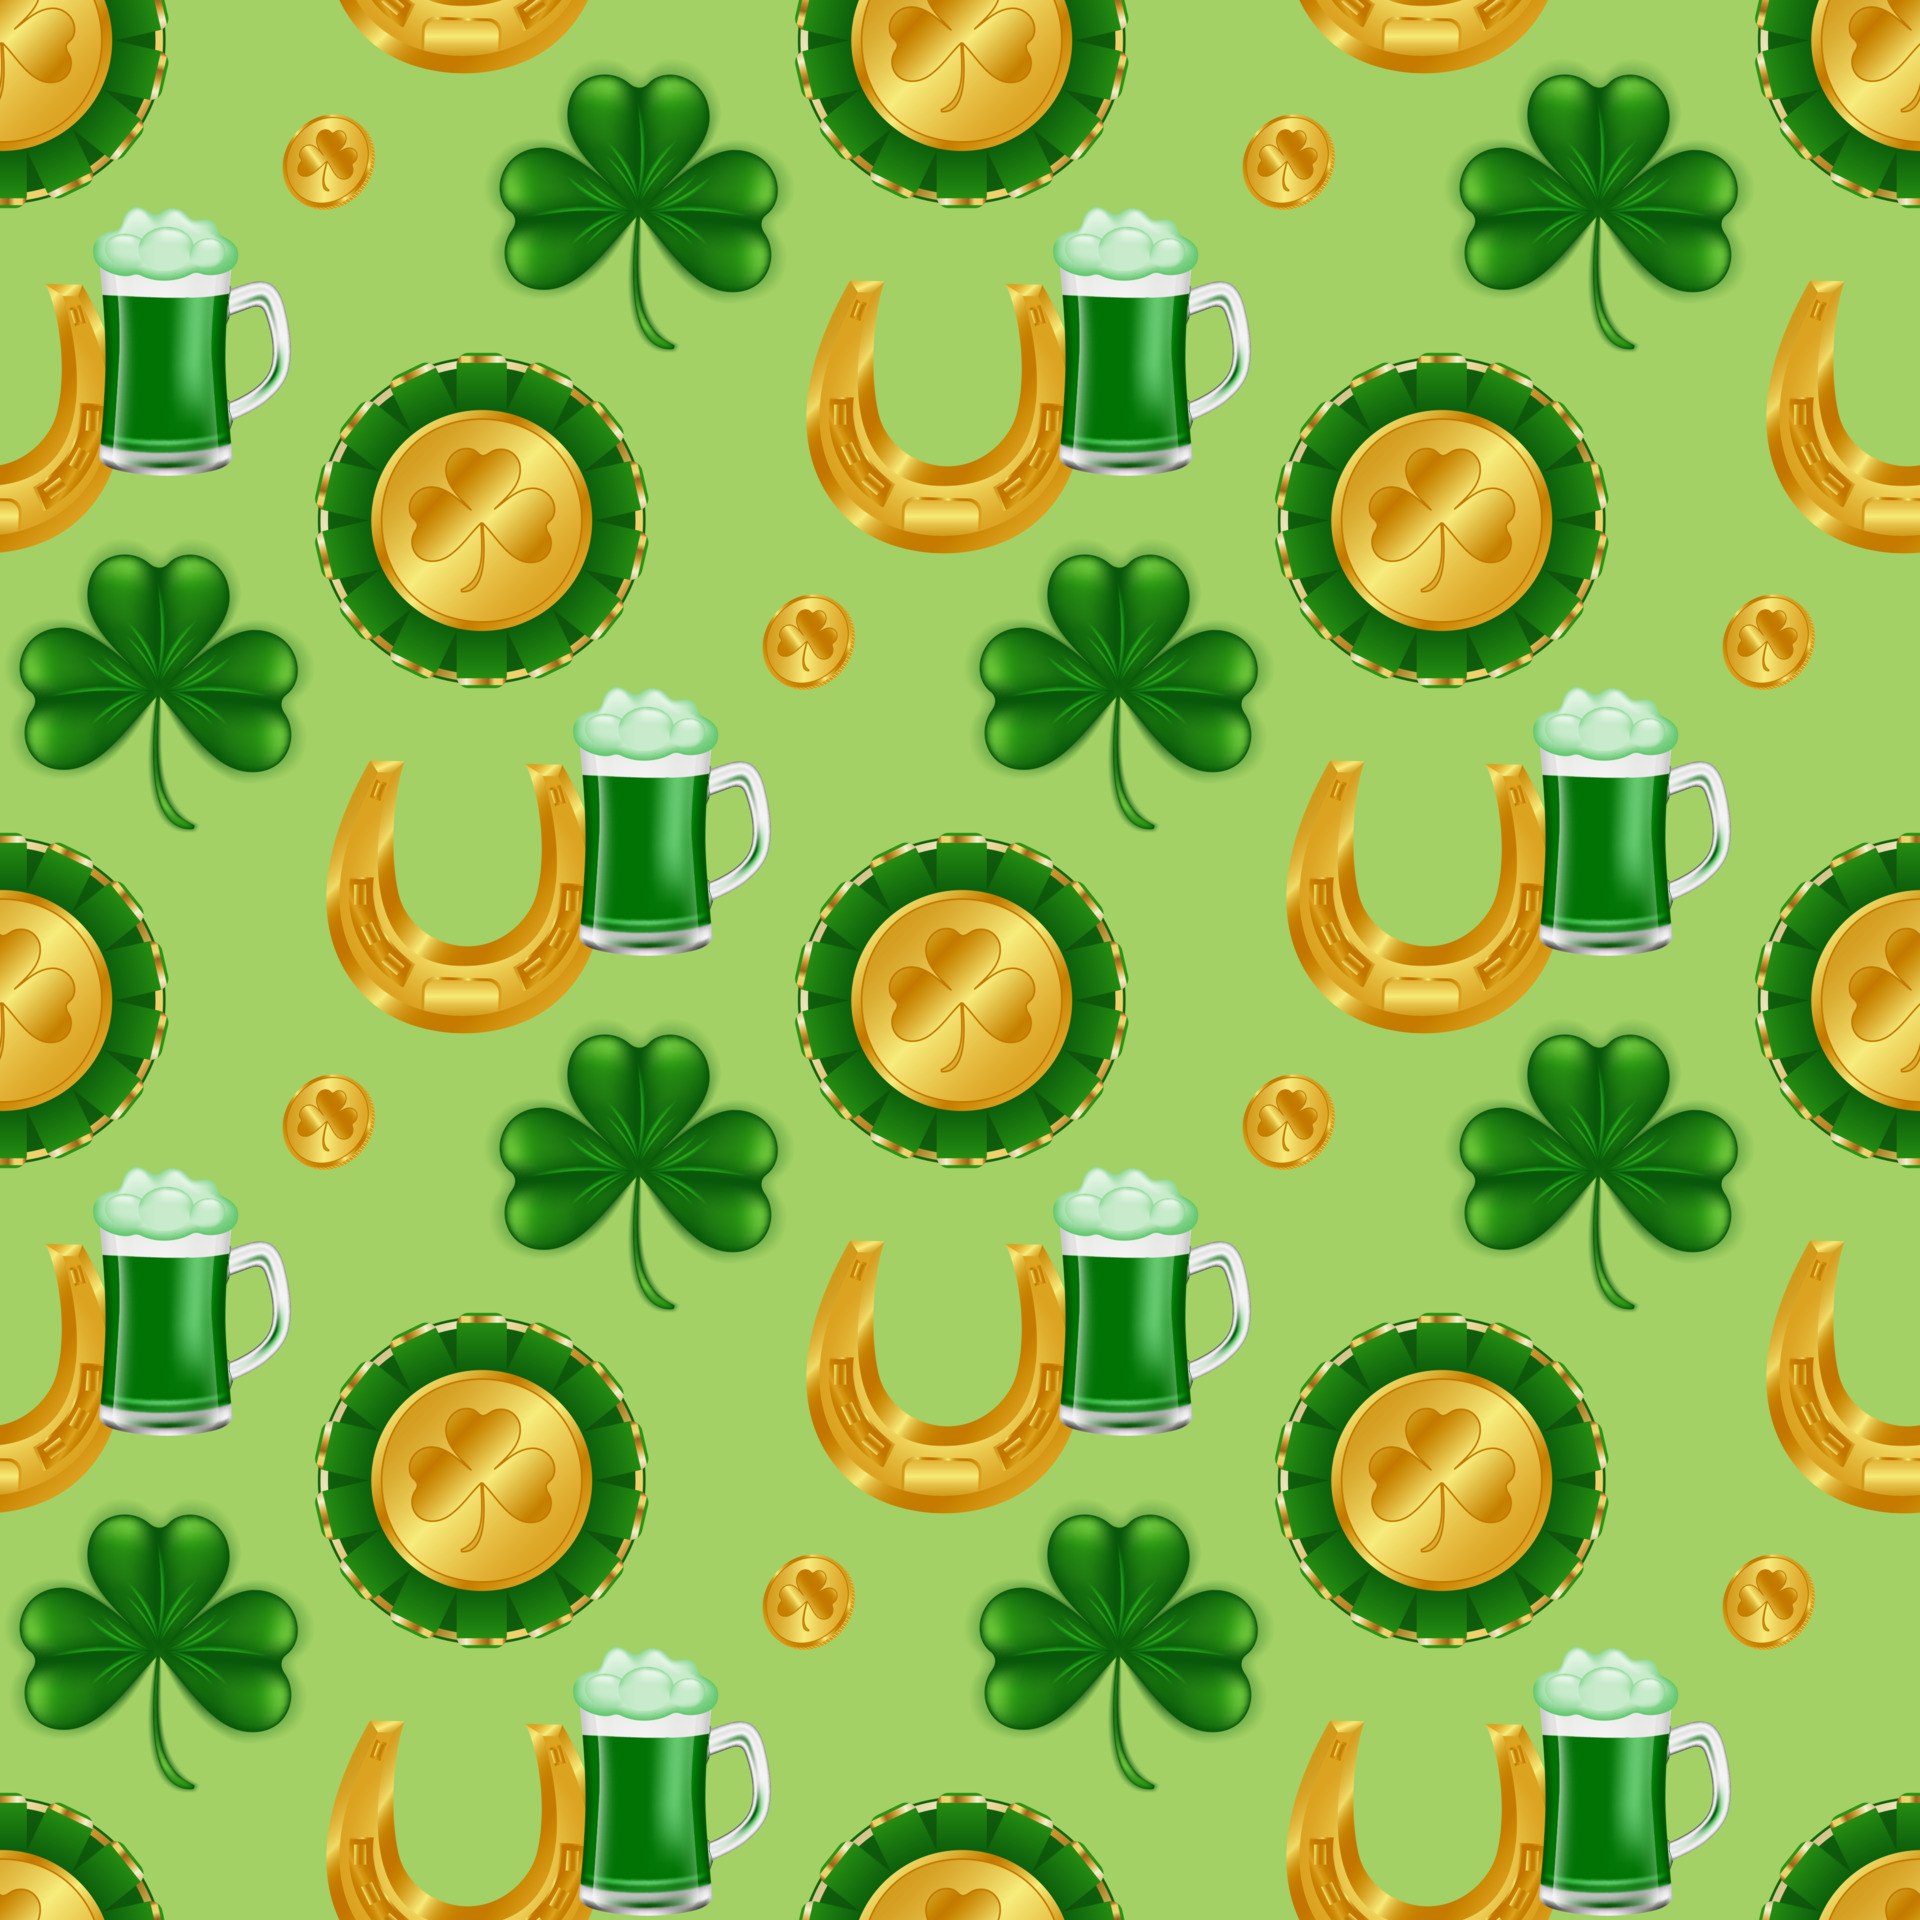 Celebrate St. Patty's Day with the Perfect Pint